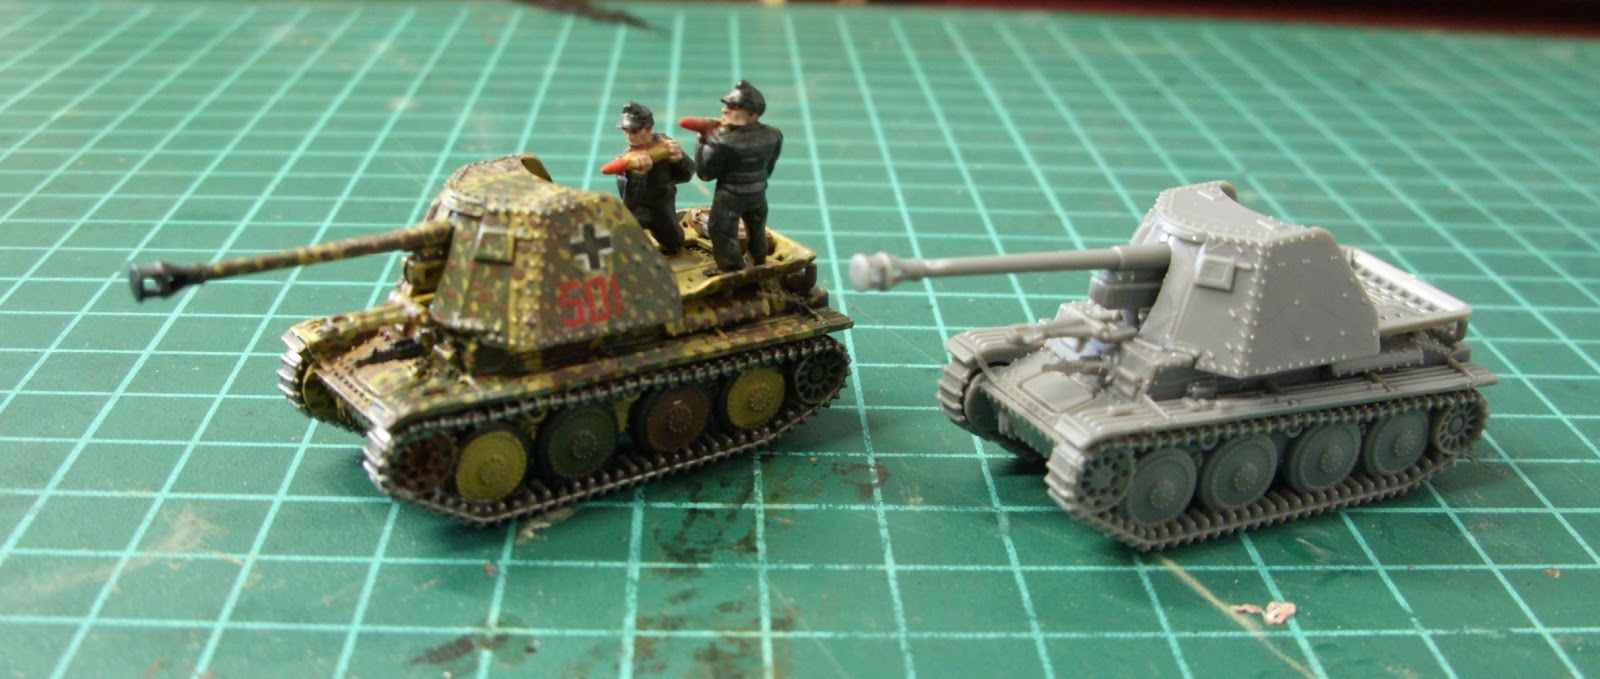 t PLASTIC SOLDIER 15mm WWII German Panzer 38 Tank/Marder Variants 5 & PSO1535